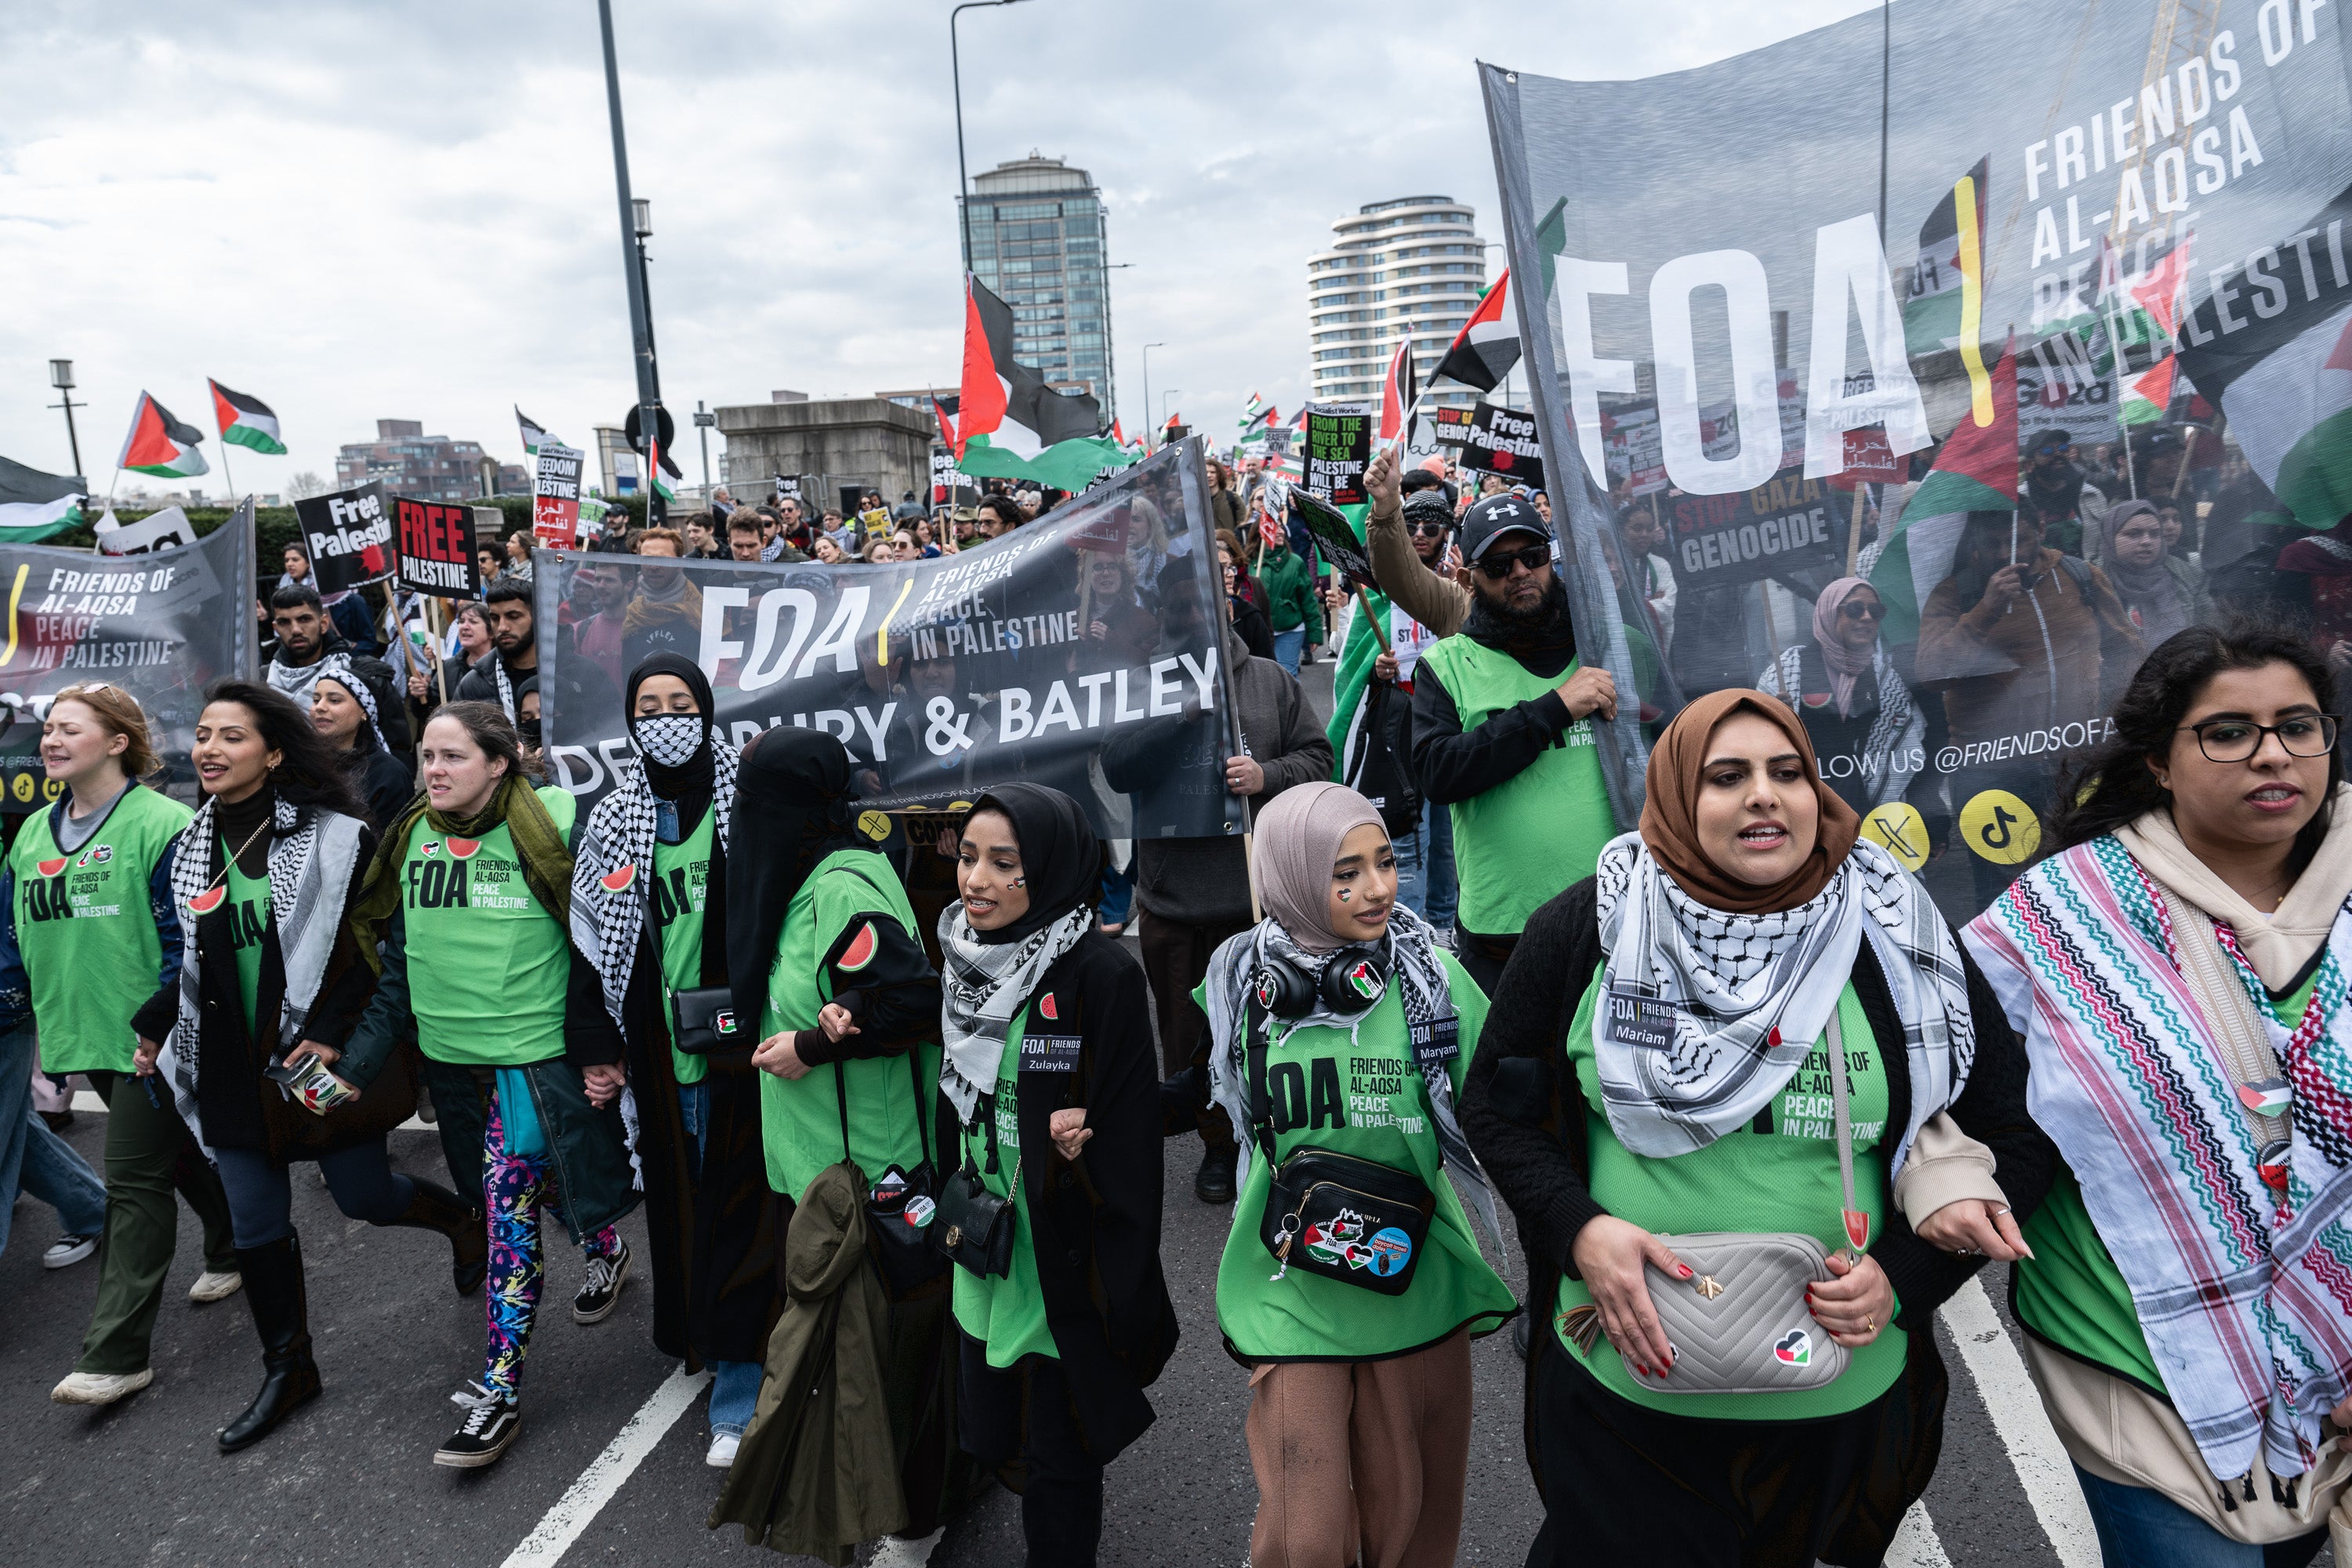 Saturday’s march was organised by the Palestine Solidarity Campaign